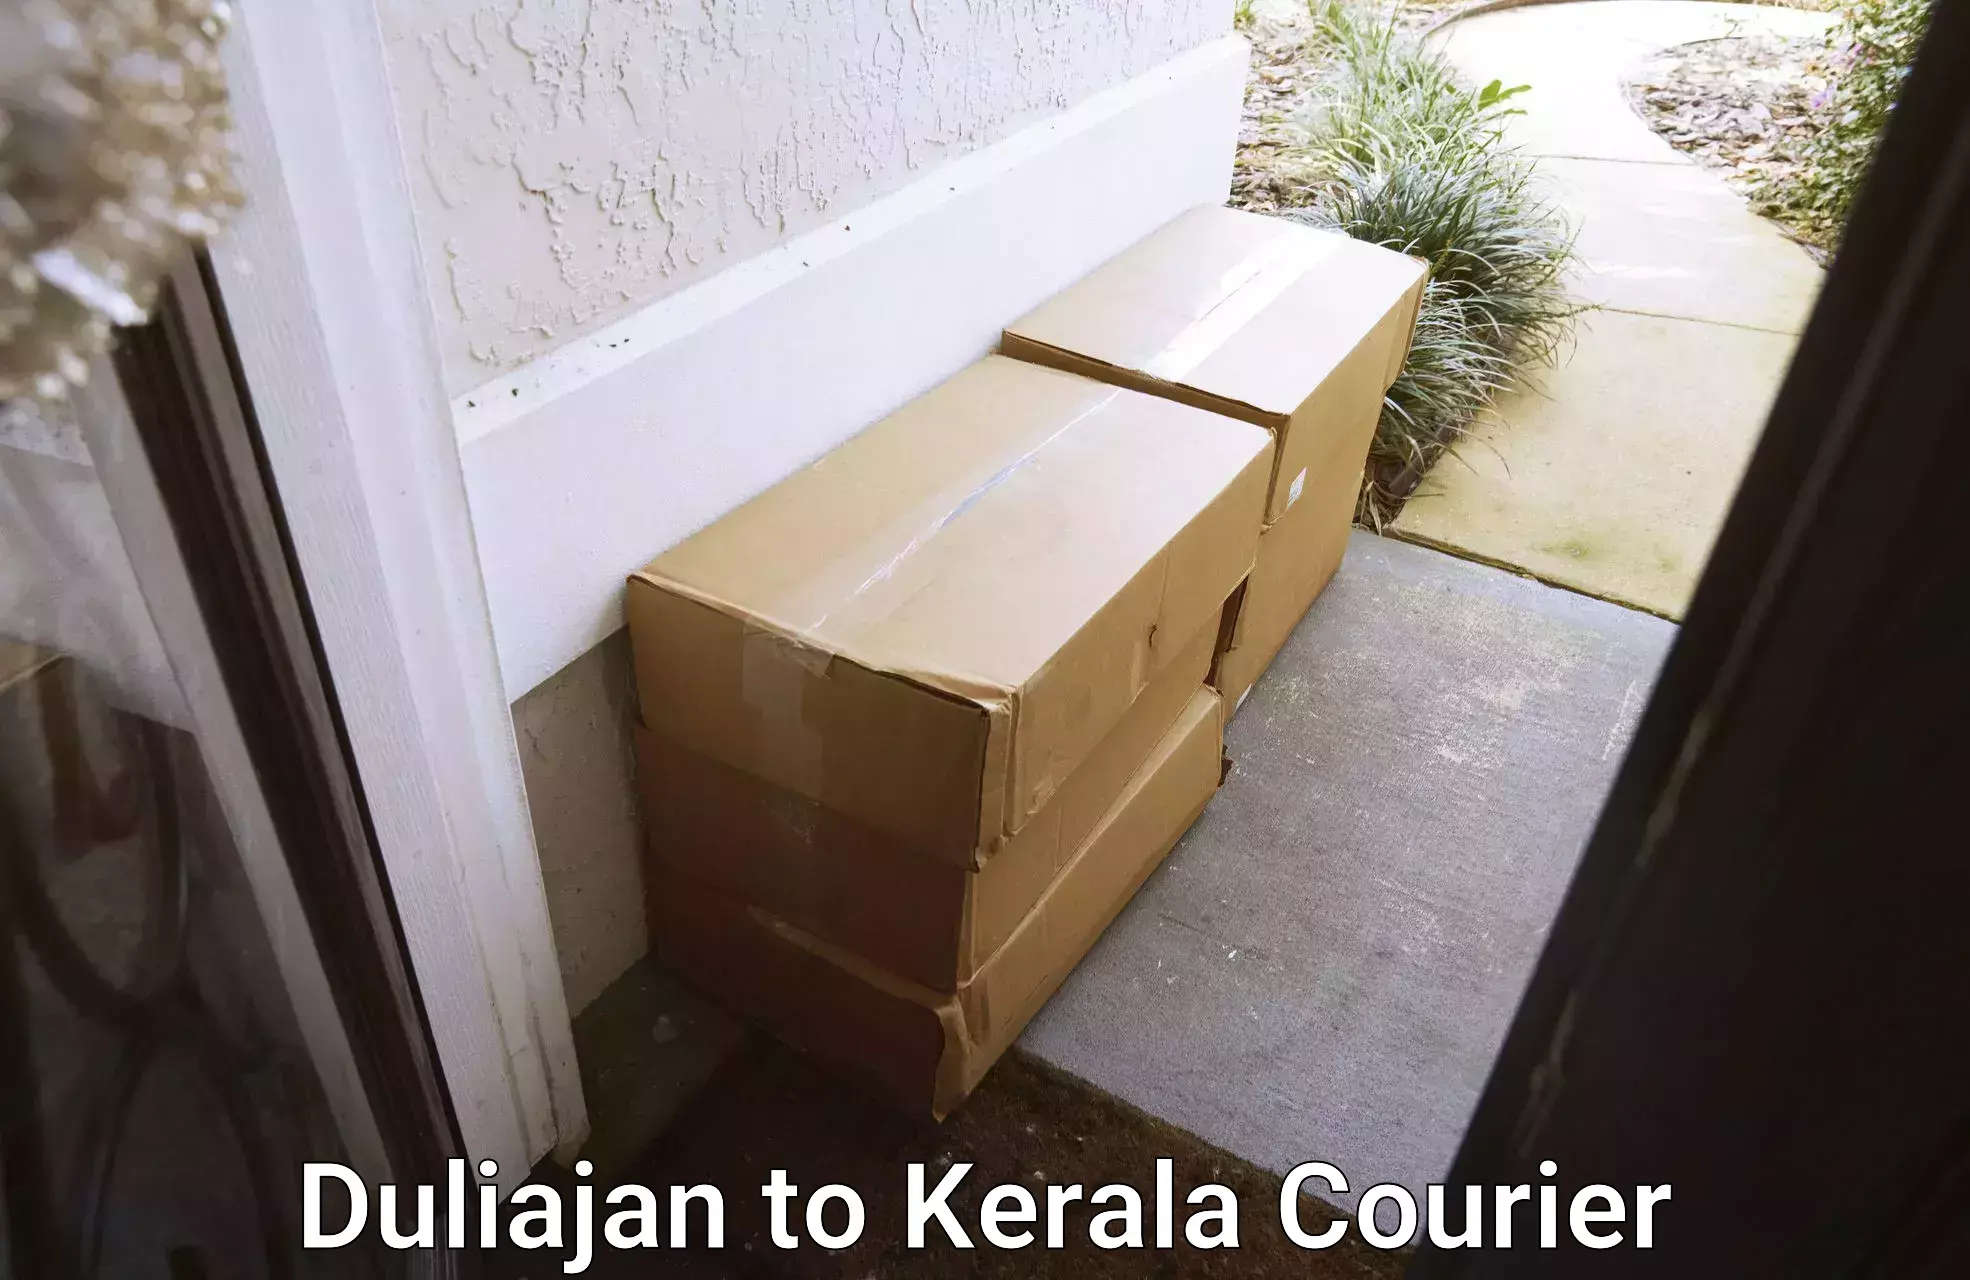 Sustainable courier practices Duliajan to Kerala